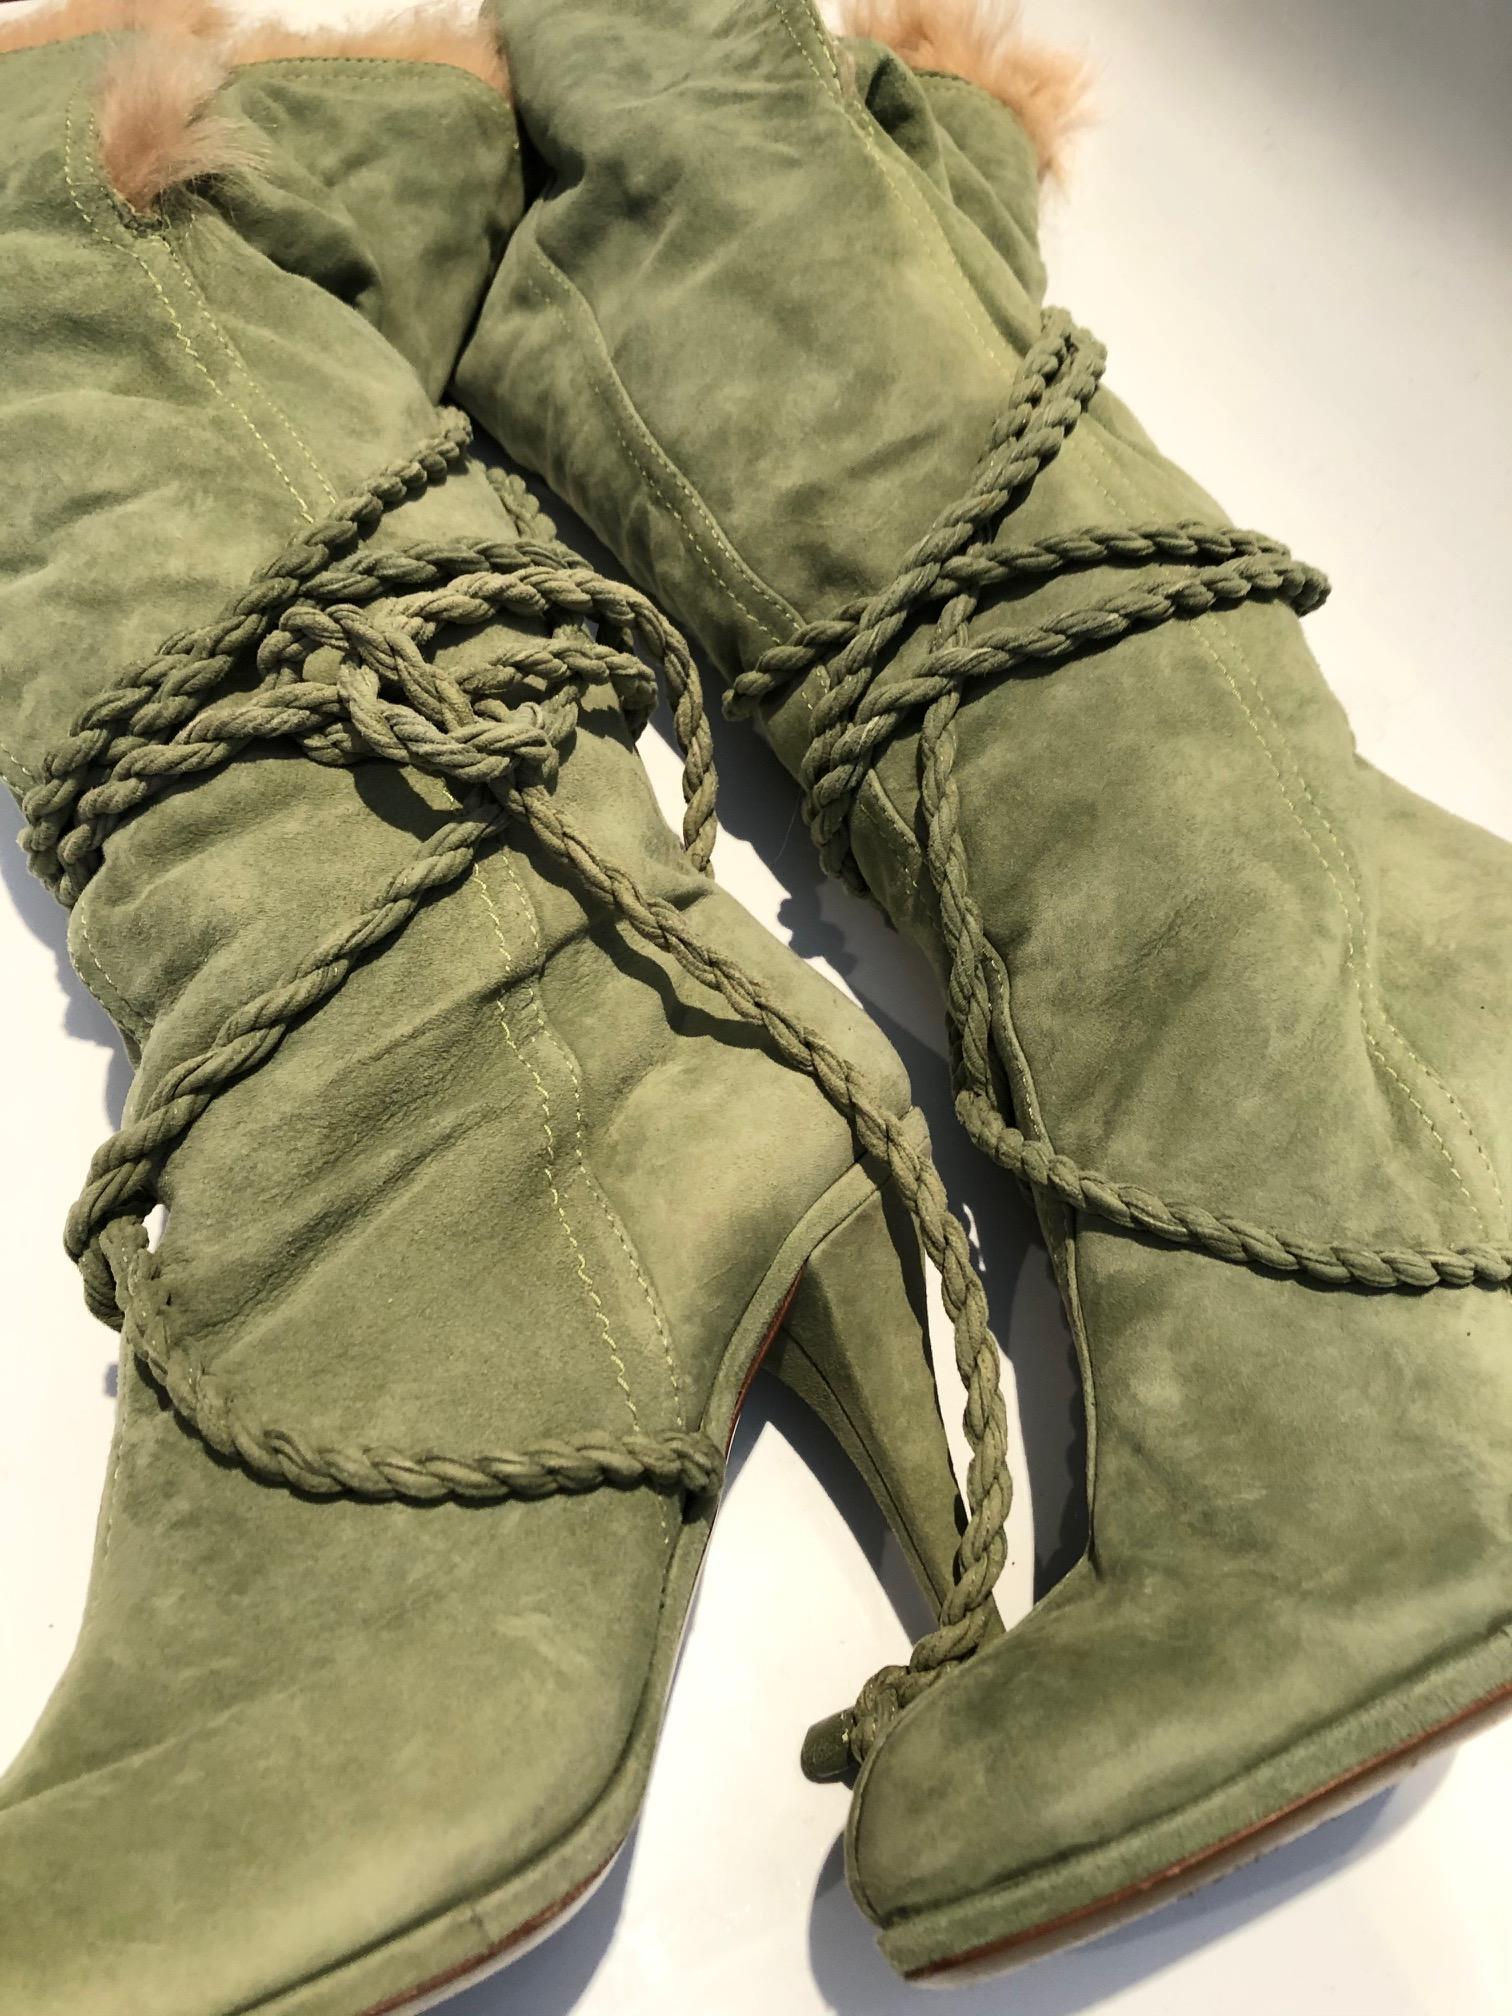 Stunning Moschino knee high boots in light green suede, light brown fur inside, tight drawstring detail, 10cm high stiletto heels, condition as just tried on once 
Size: italian 40 